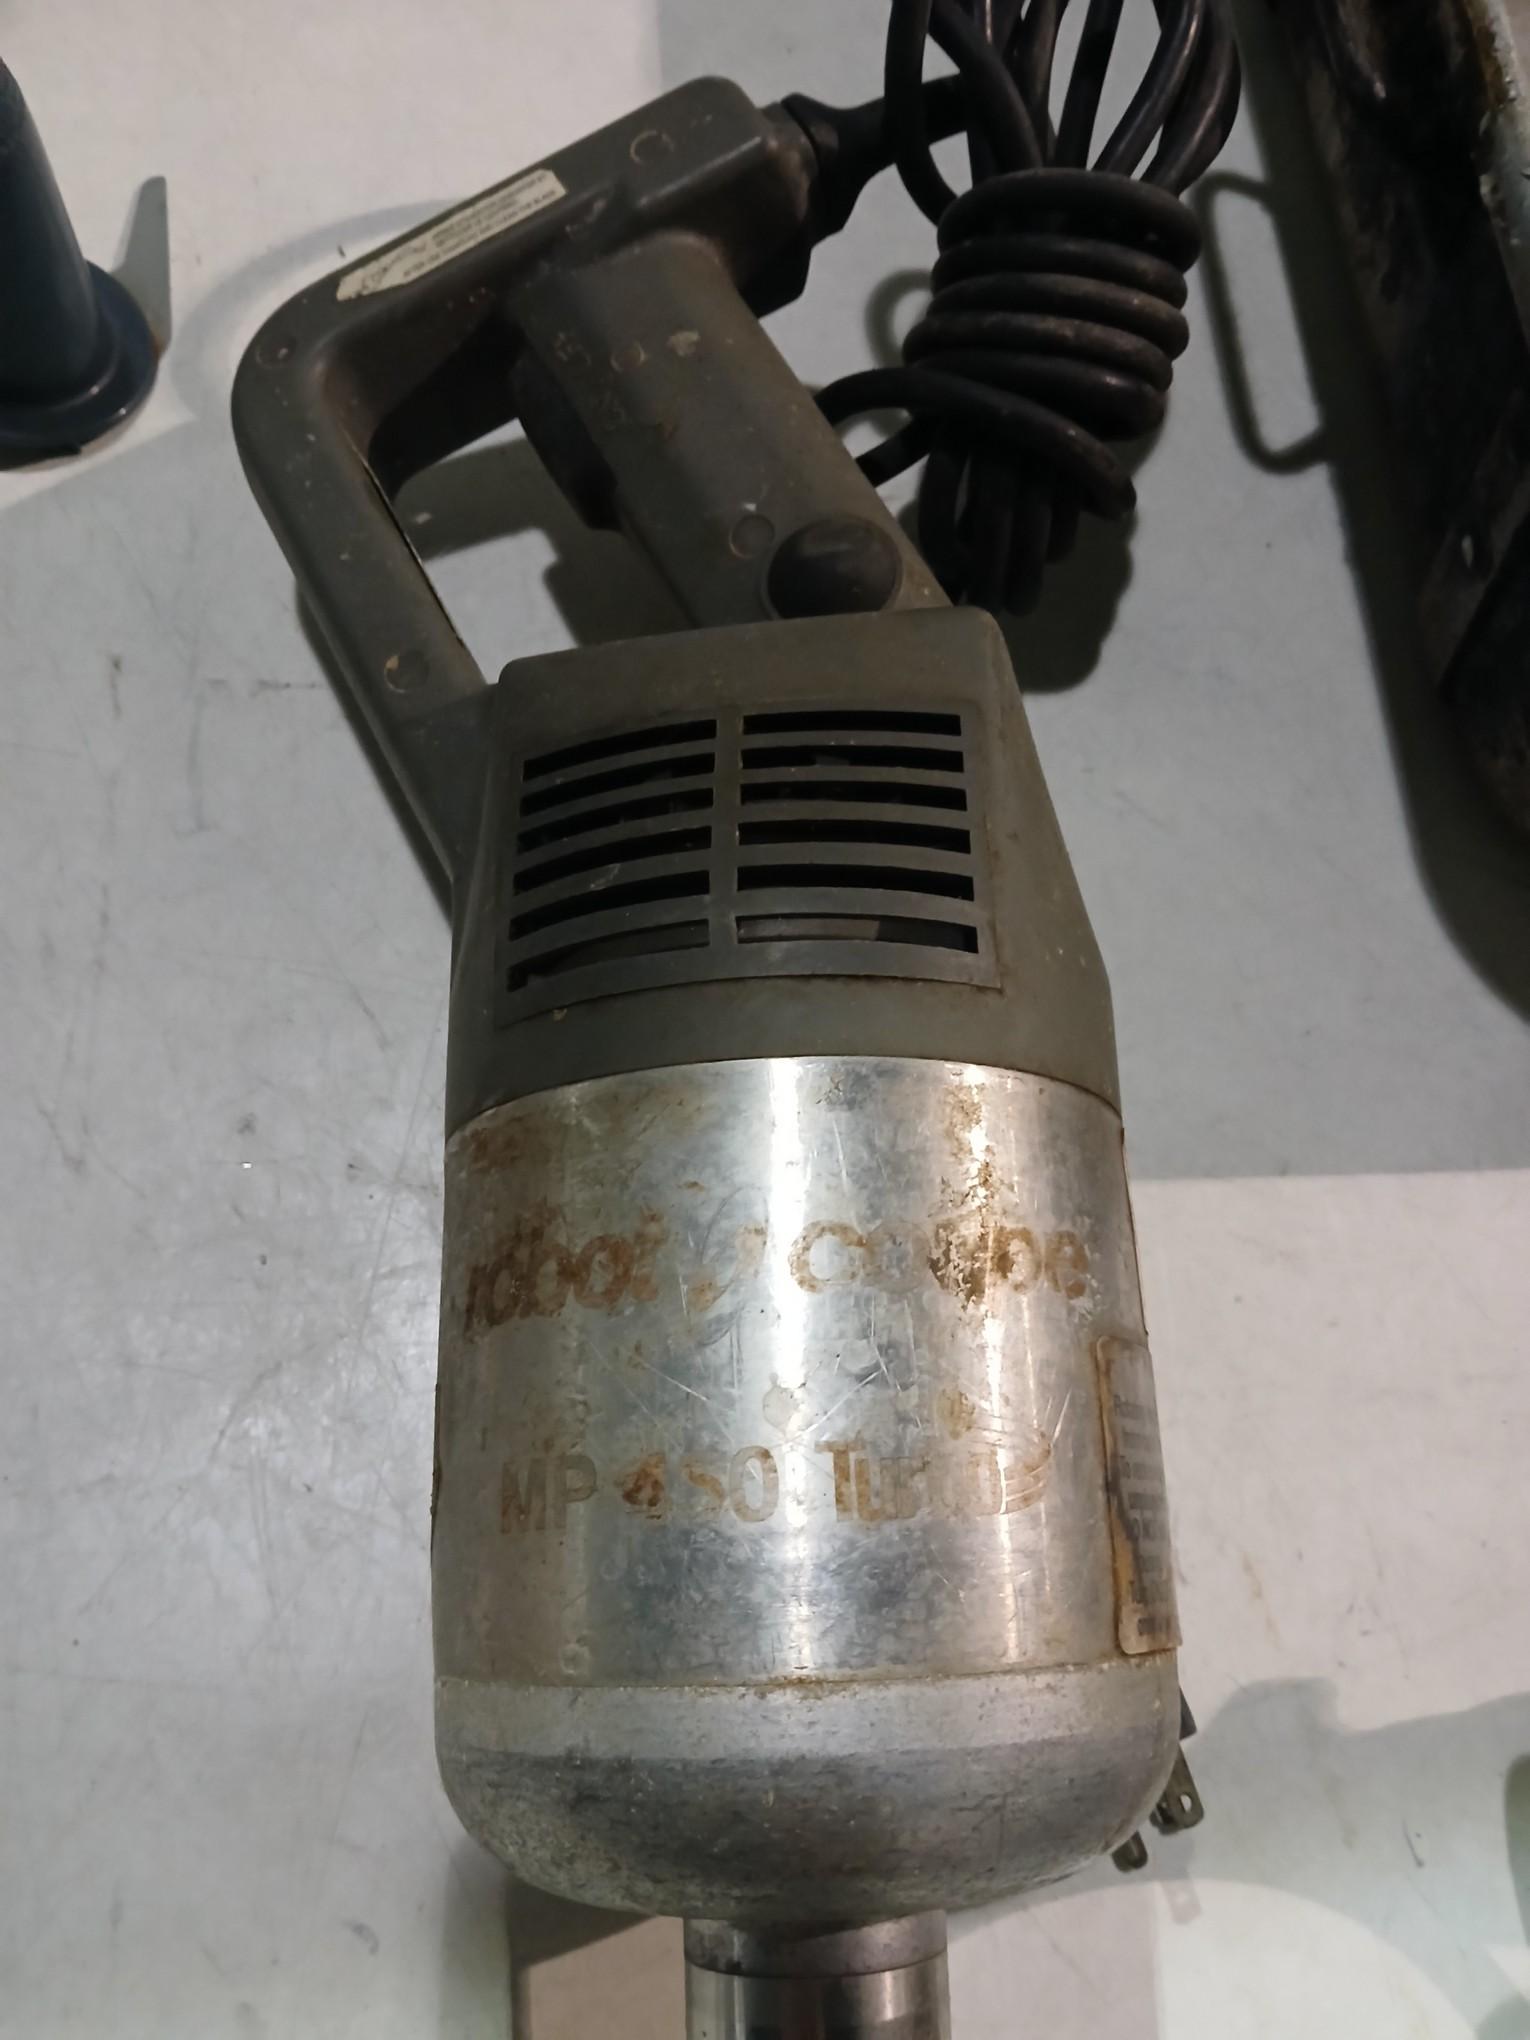 Robo-Coupe MP-450 Burr Mixer / Stick Mixer - Please see pics for additional specs.